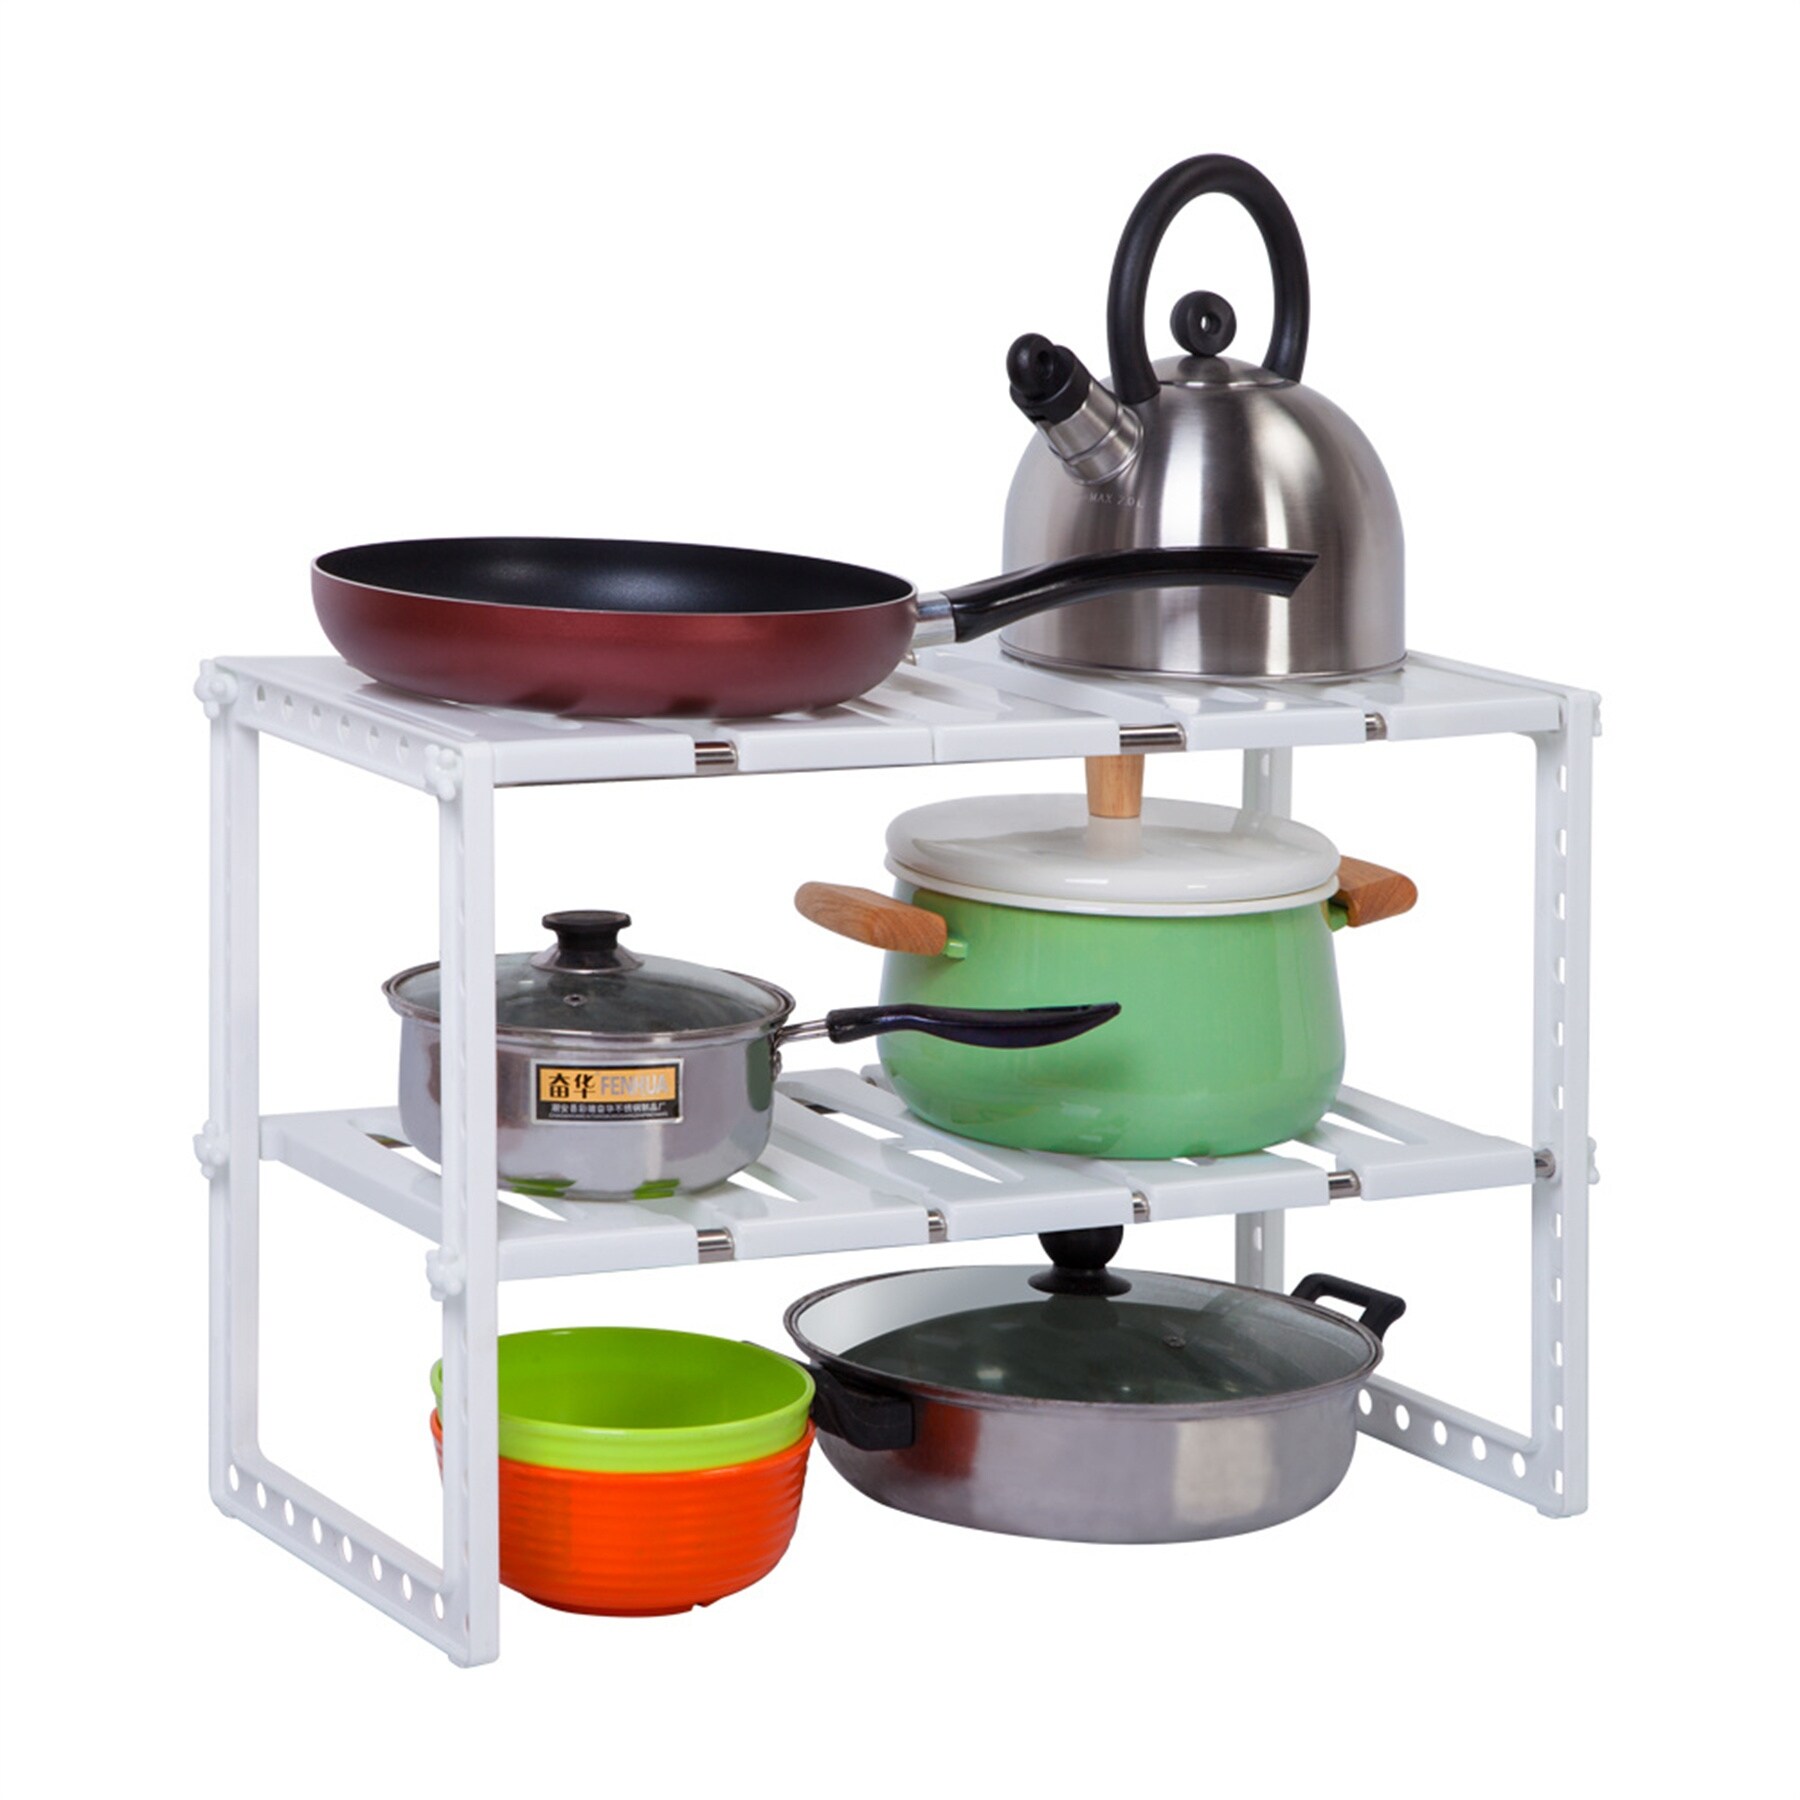 https://ak1.ostkcdn.com/images/products/is/images/direct/f63c392cc9b333303d8066aebc05573e10291f8f/2-Tier-Under-Sink-Rack-Kitchen-Shelf-Organizer-W--Stainless-Steel-Tube.jpg